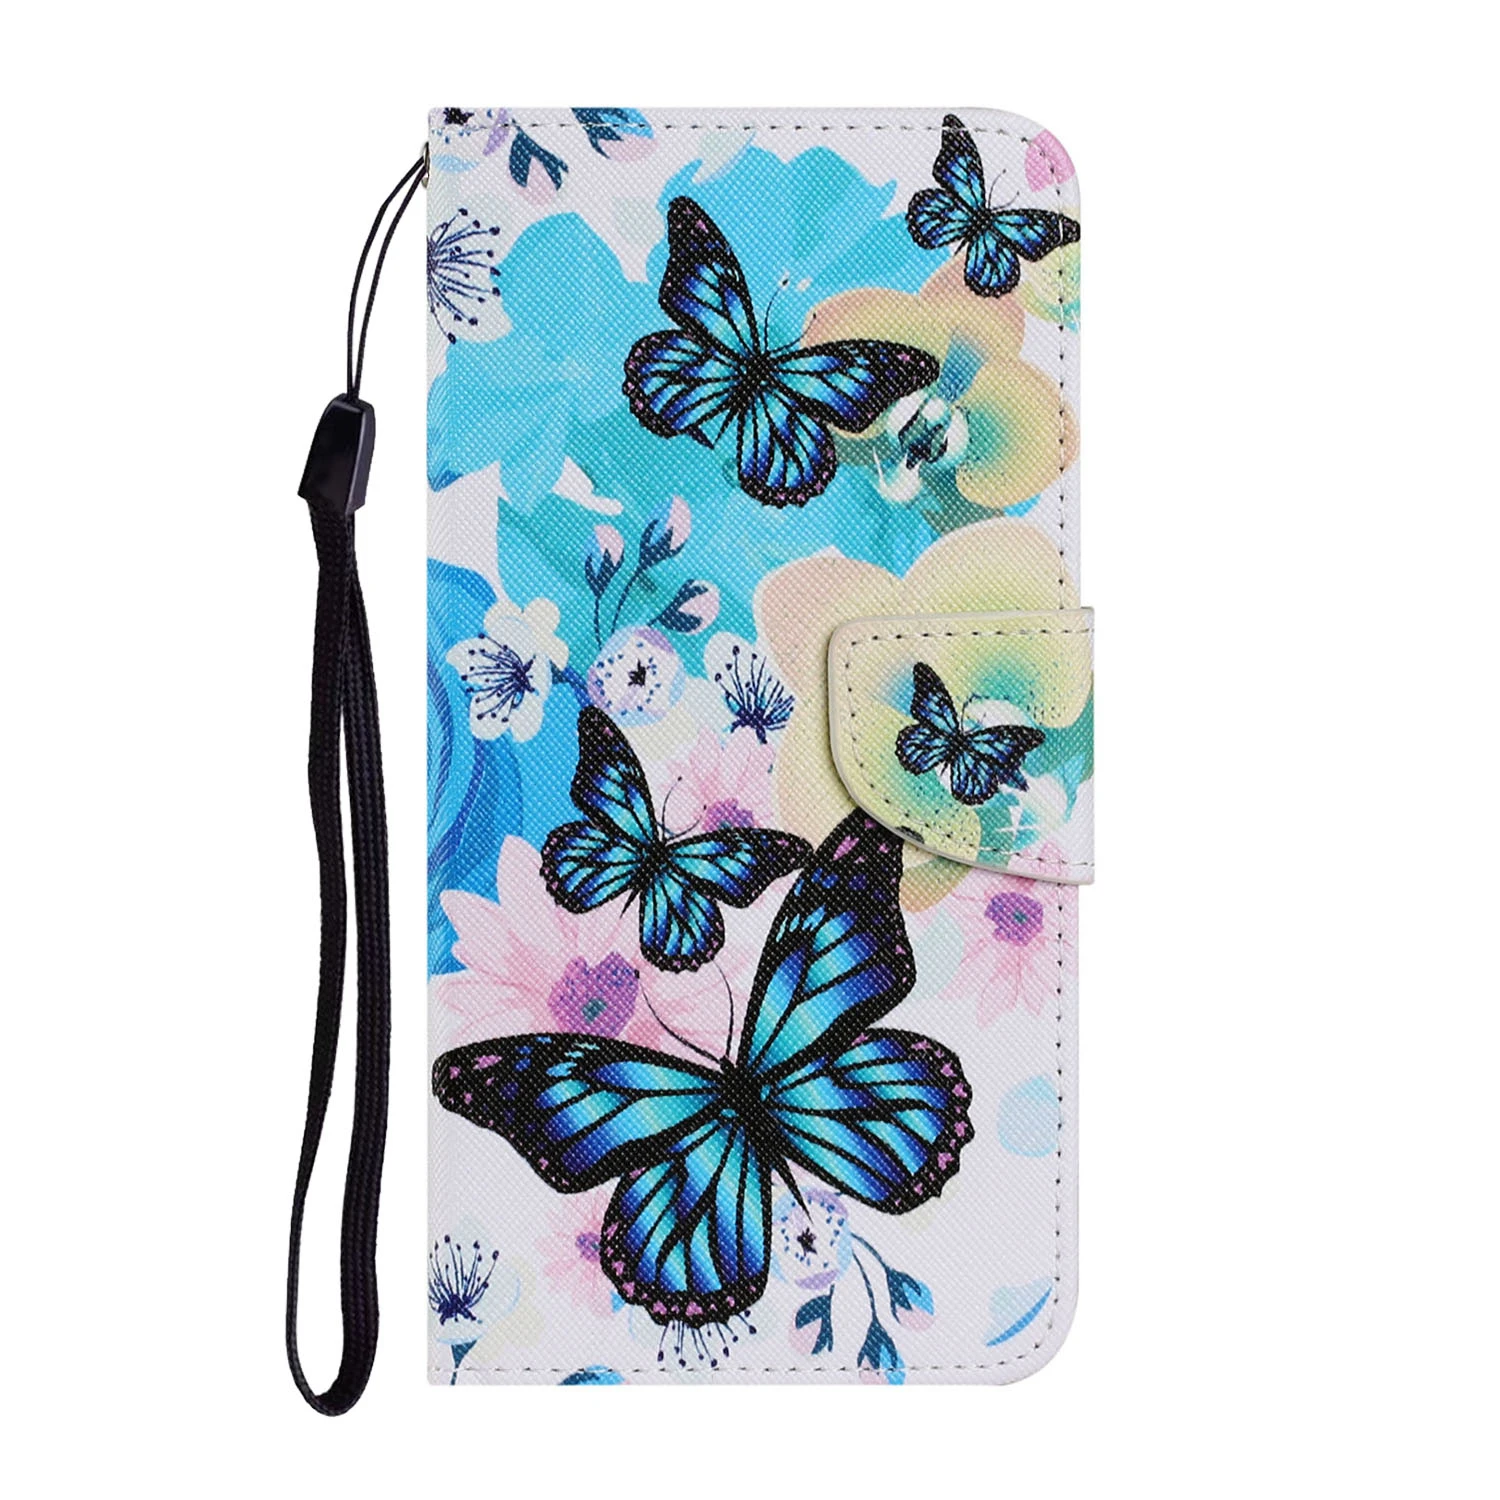 xiaomi leather case custom Leather Case For Xiaomi Redmi Note 7 7A 8 8A 8T 9 9S 9A 9C Pro Max Butterfly Animal Painted Book Stand Flip Leather Phone Cover case for xiaomi Cases For Xiaomi